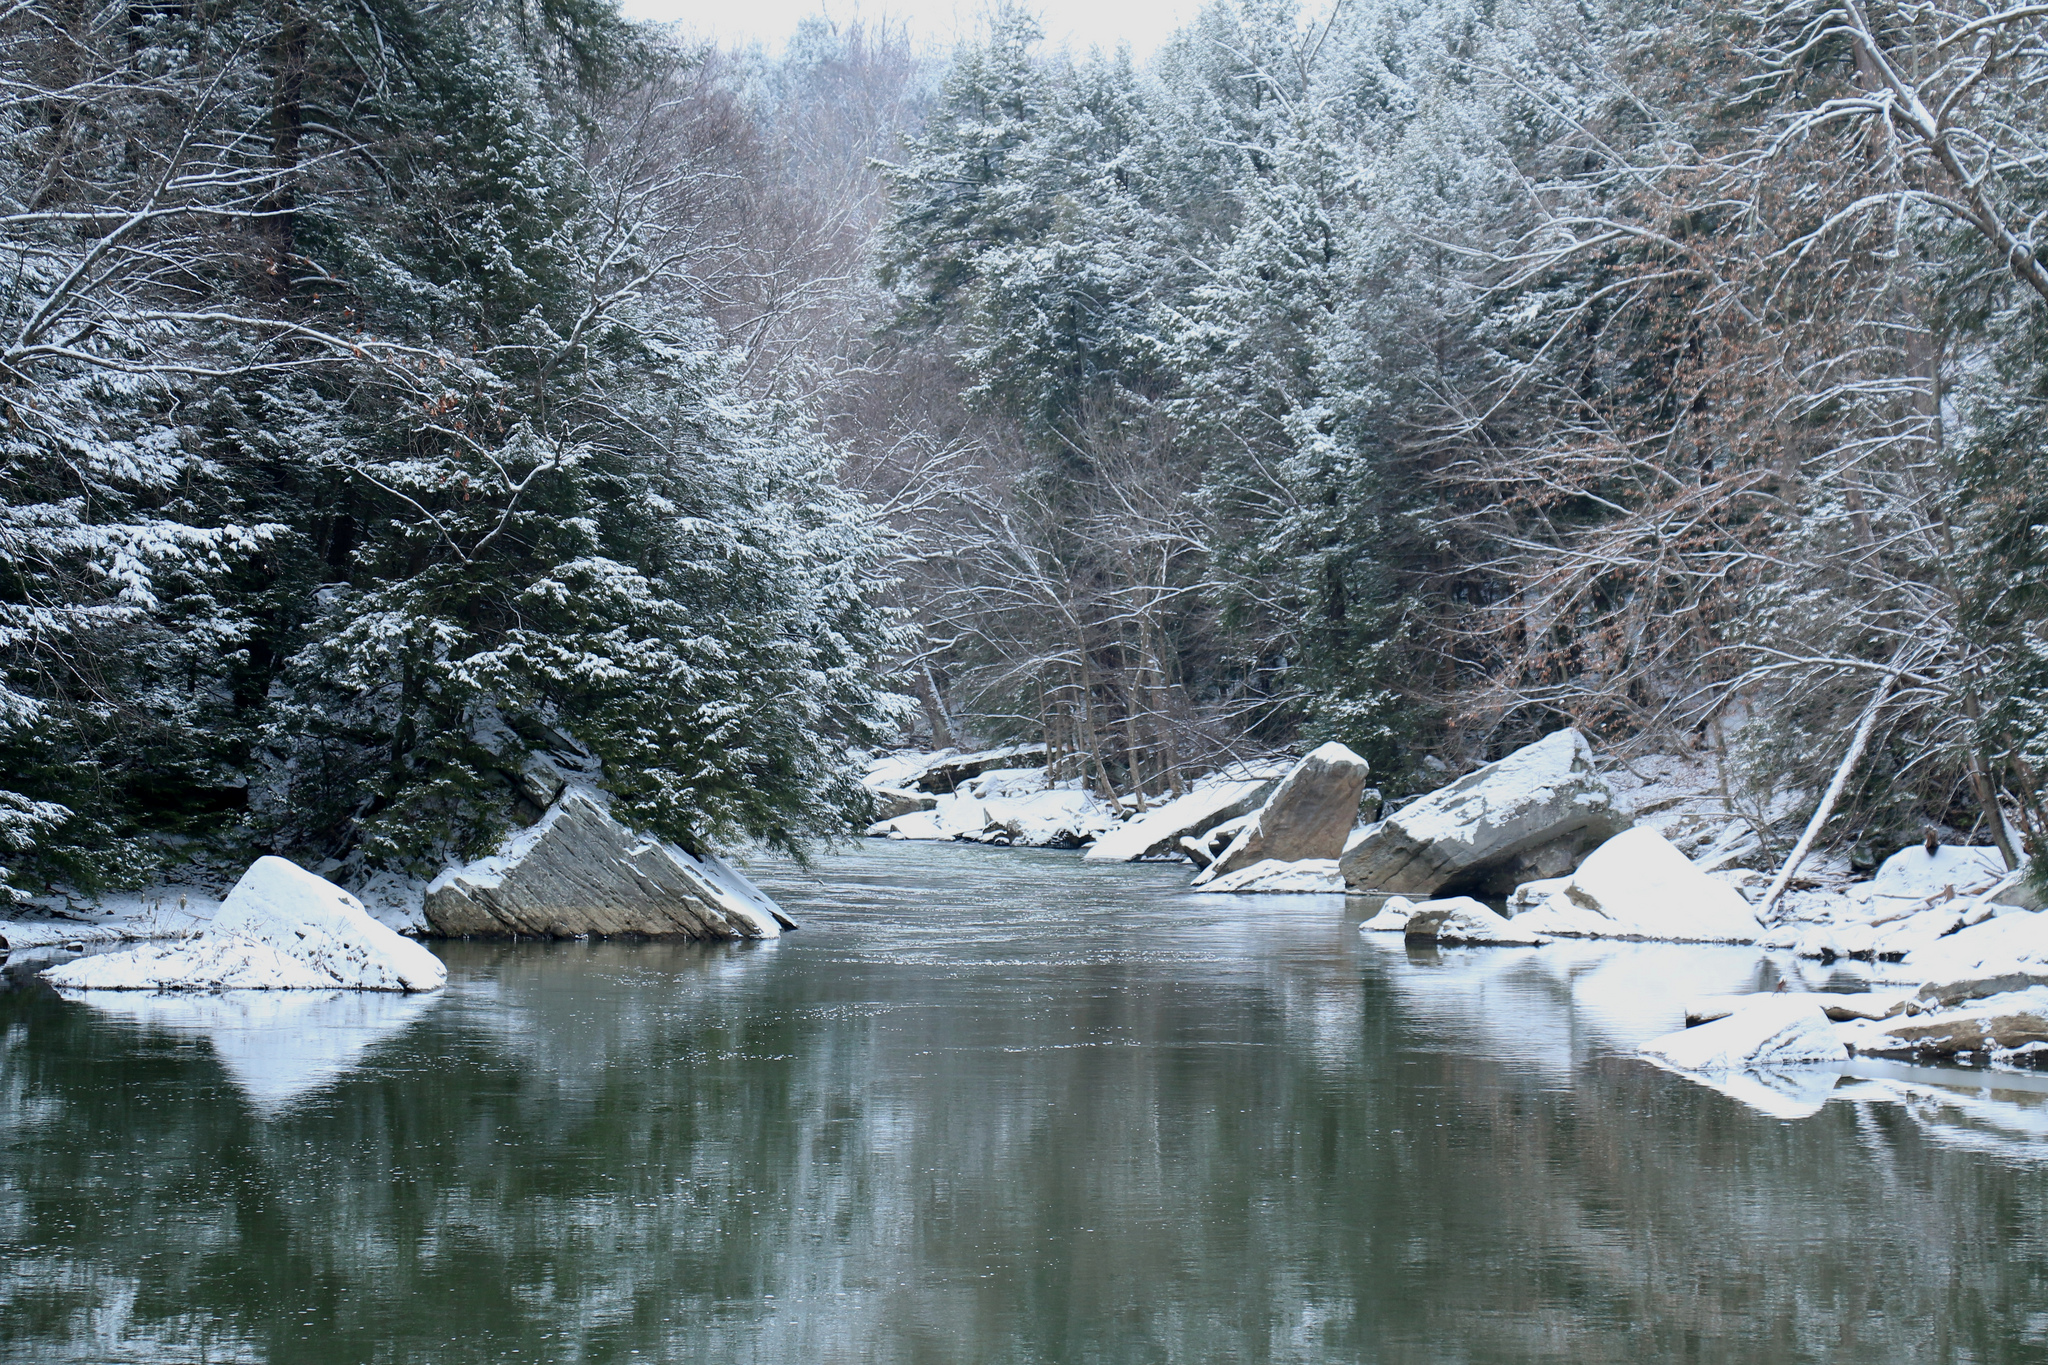 10 Places in Pennsylvania That Will Make You Feel As Though You’ve Entered A Winter Wonderland